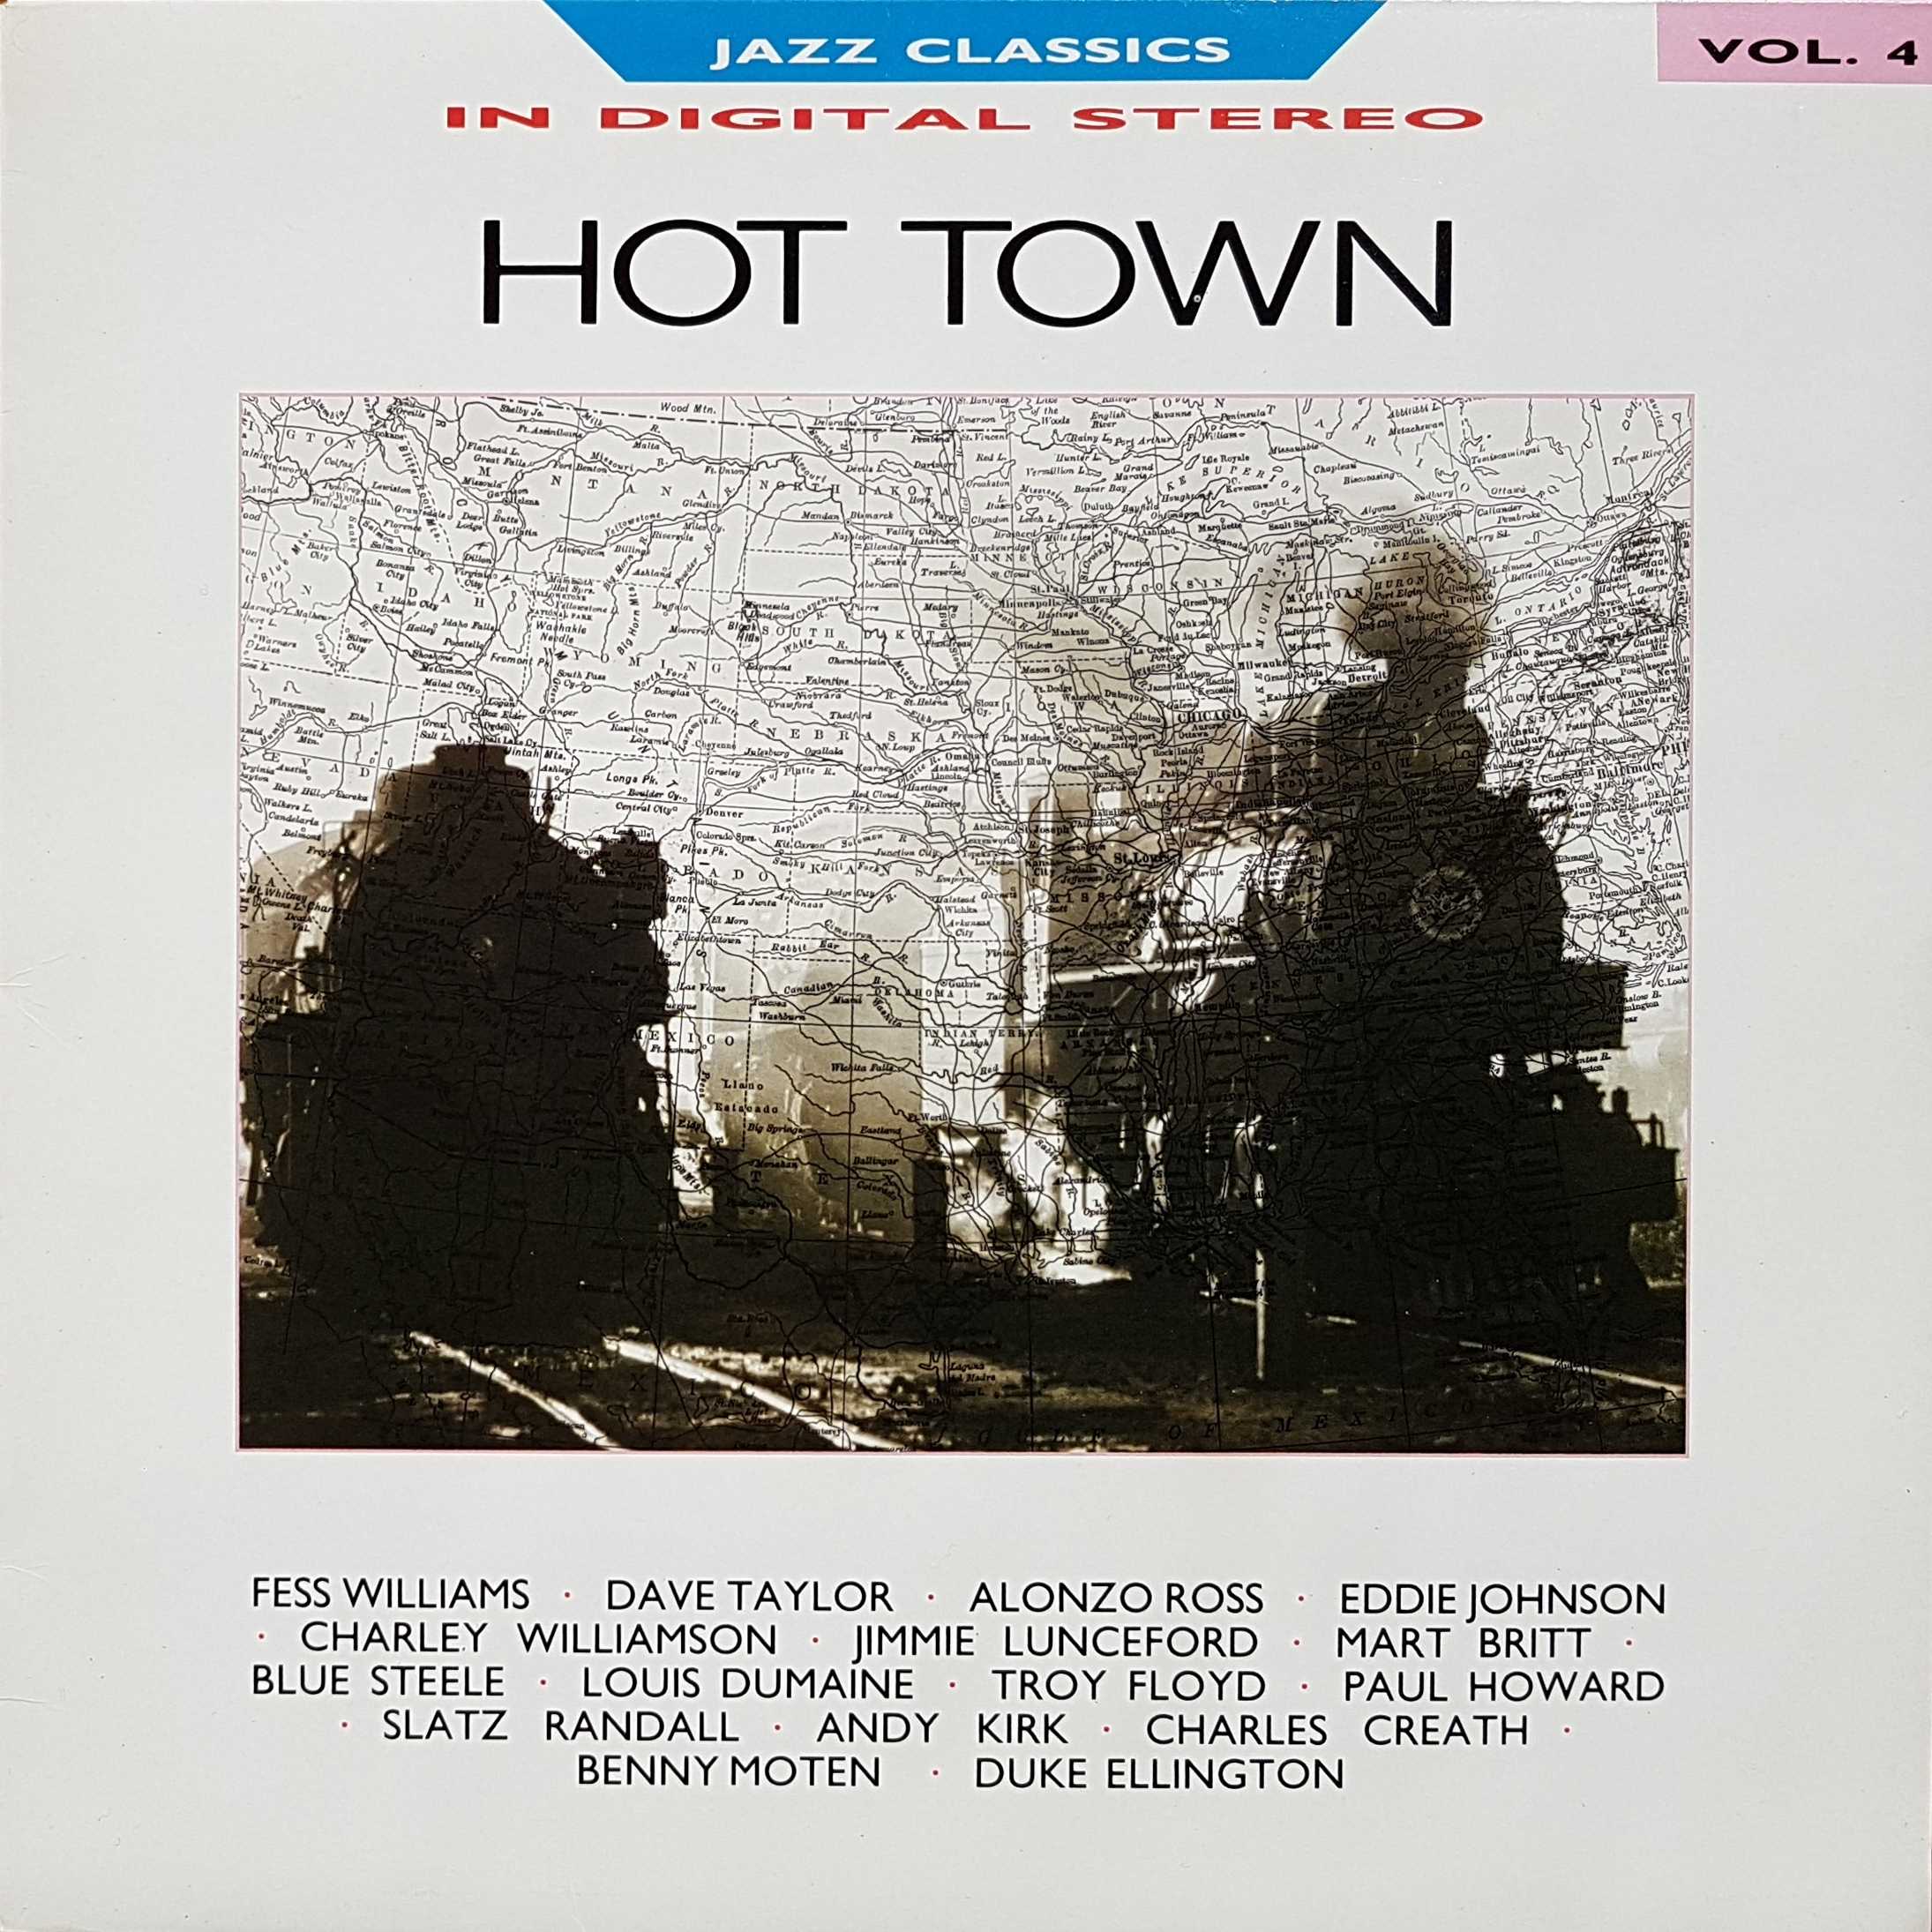 Picture of REB 647 Jazz classics - Volume 4, Hot Town by artist Various from the BBC albums - Records and Tapes library